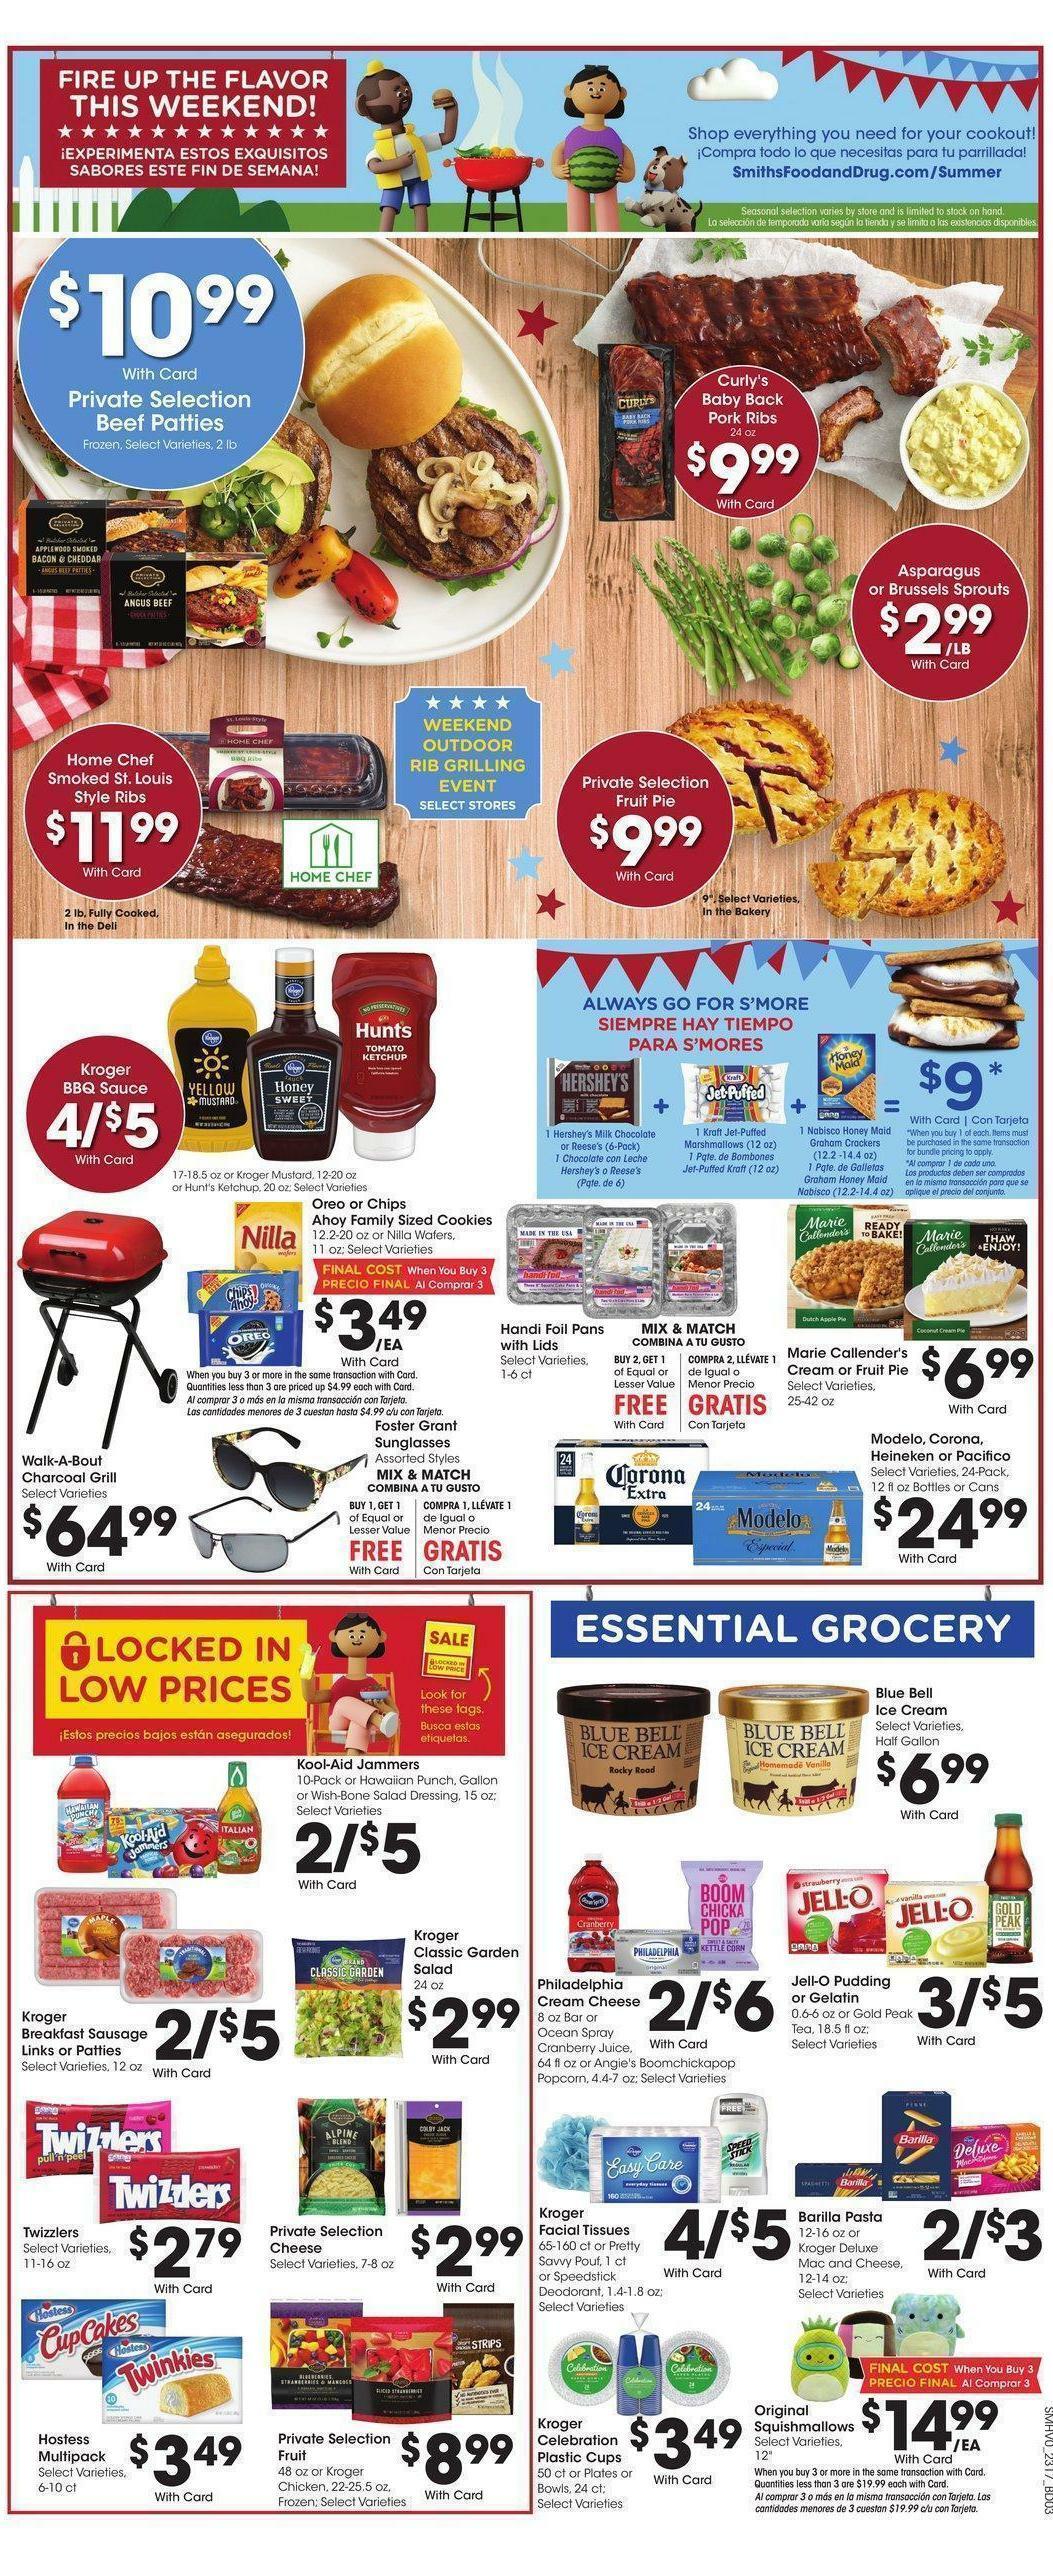 Smith's Weekly Ad from May 24